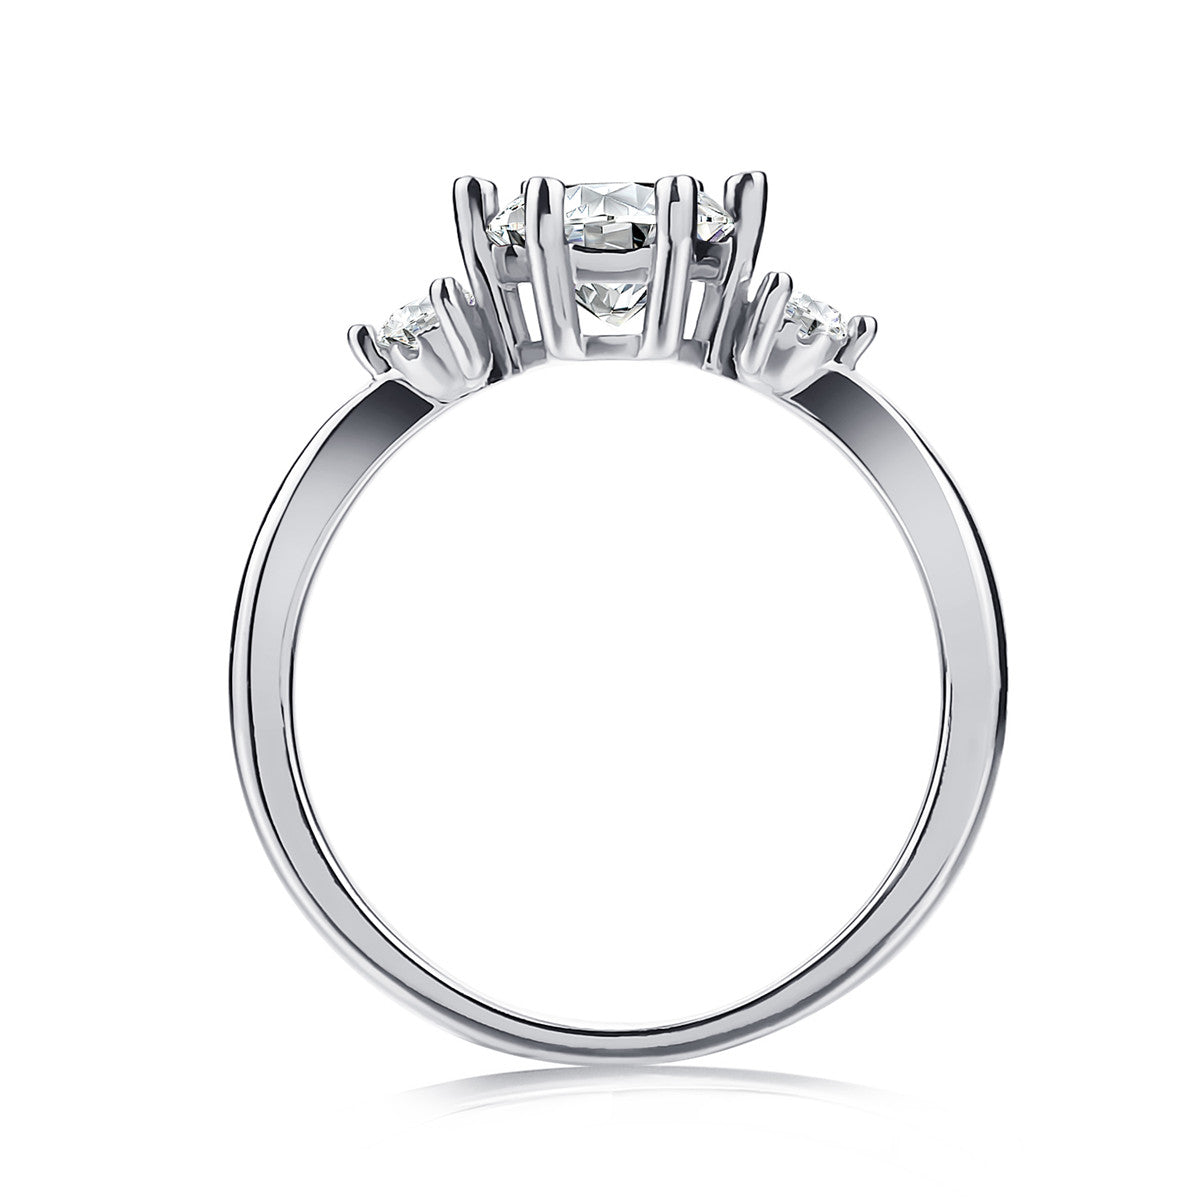 Moissanite by Cate & Chloe Sarah Sterling Silver Ring with Moissanite Crystals